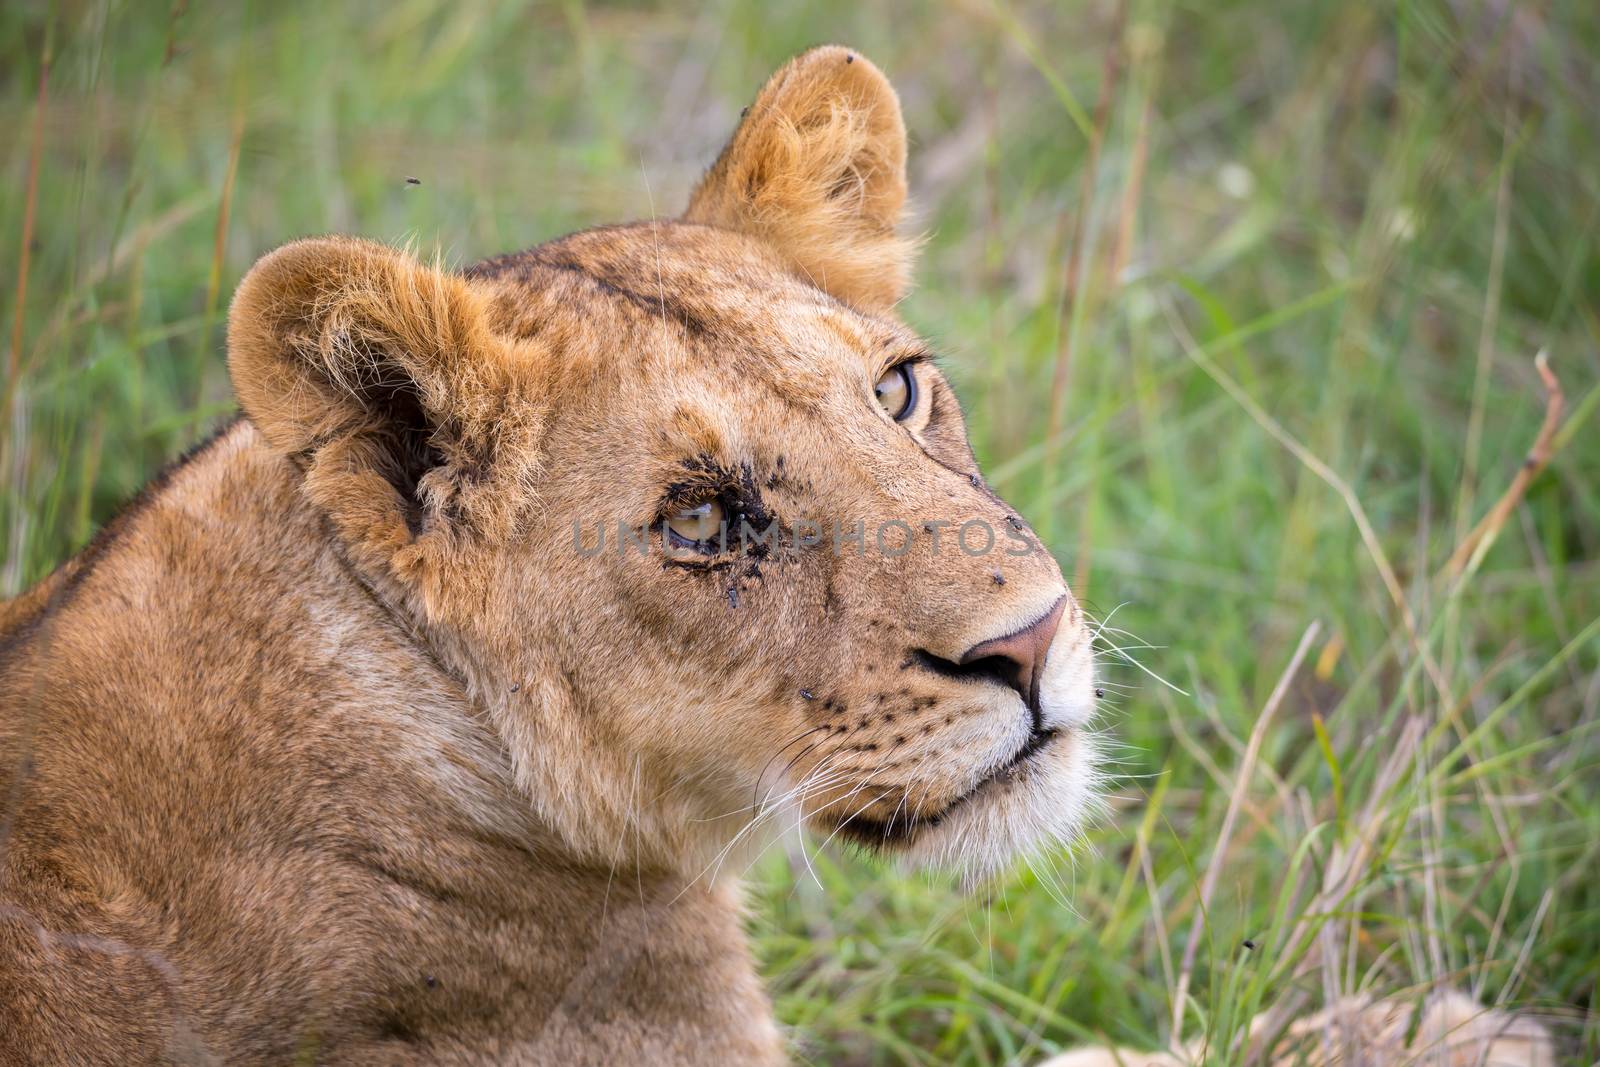 The face of a young lioness in close-up by 25ehaag6